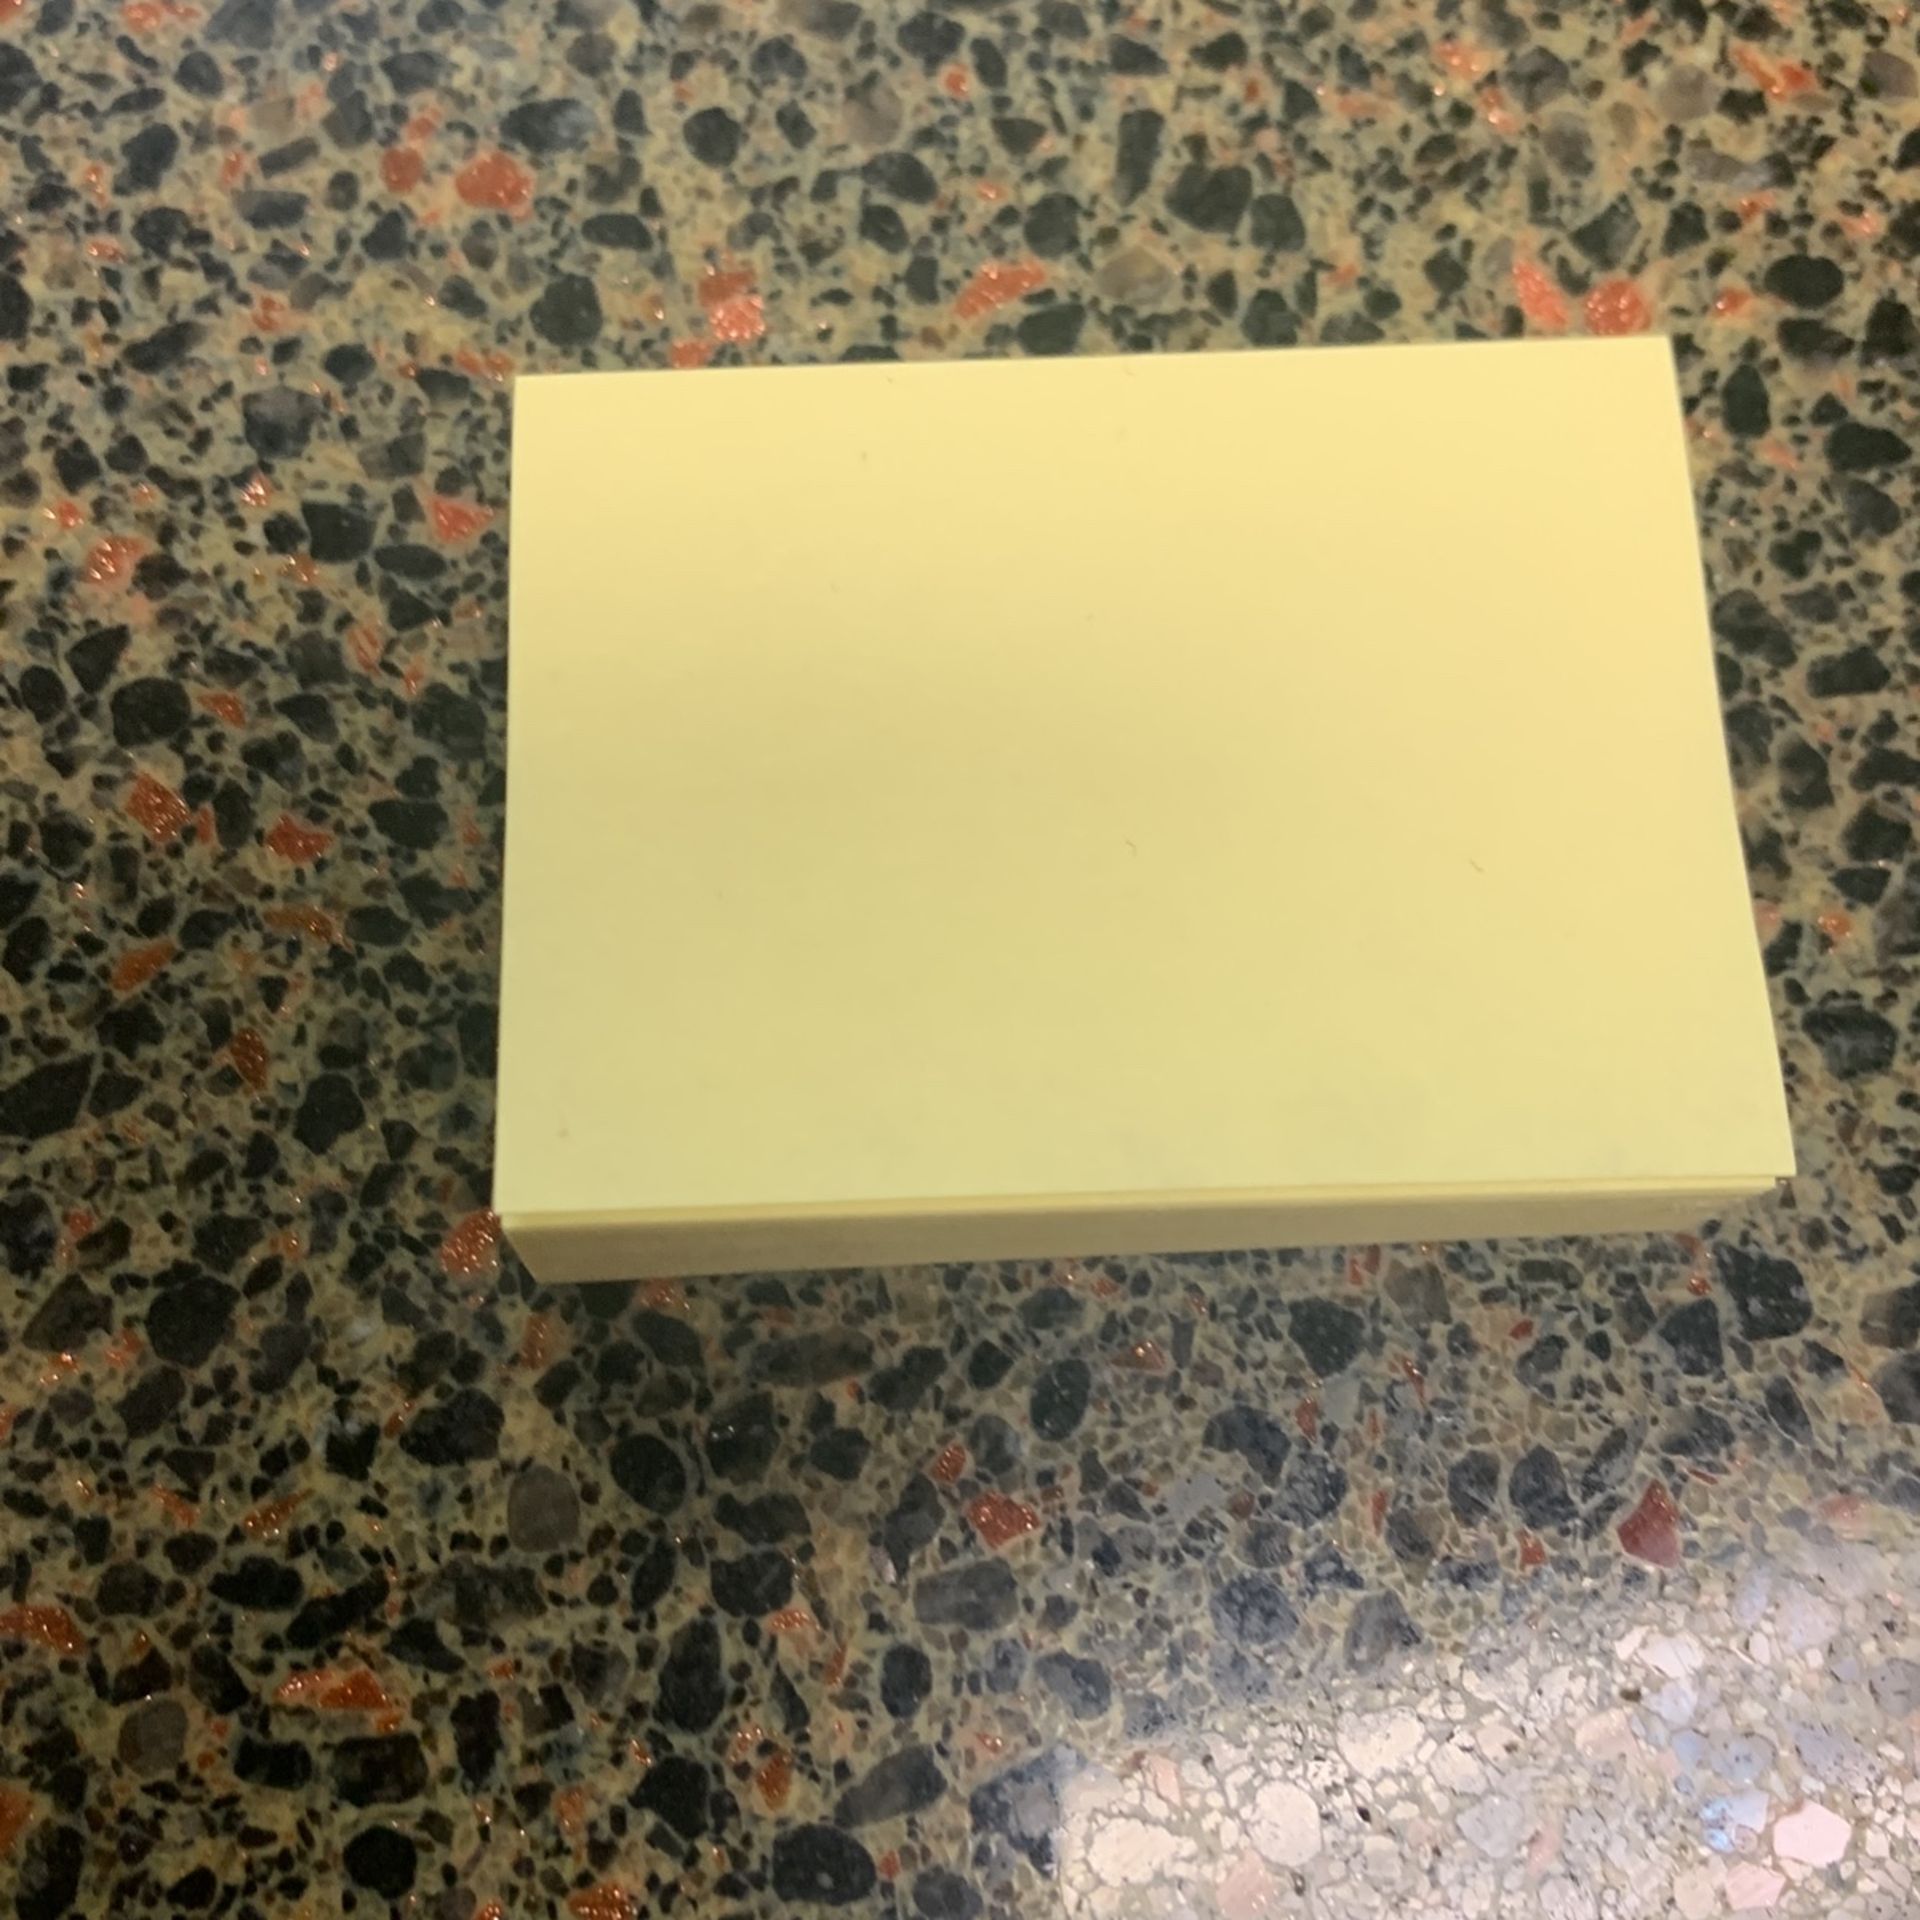 This Post It Notepad